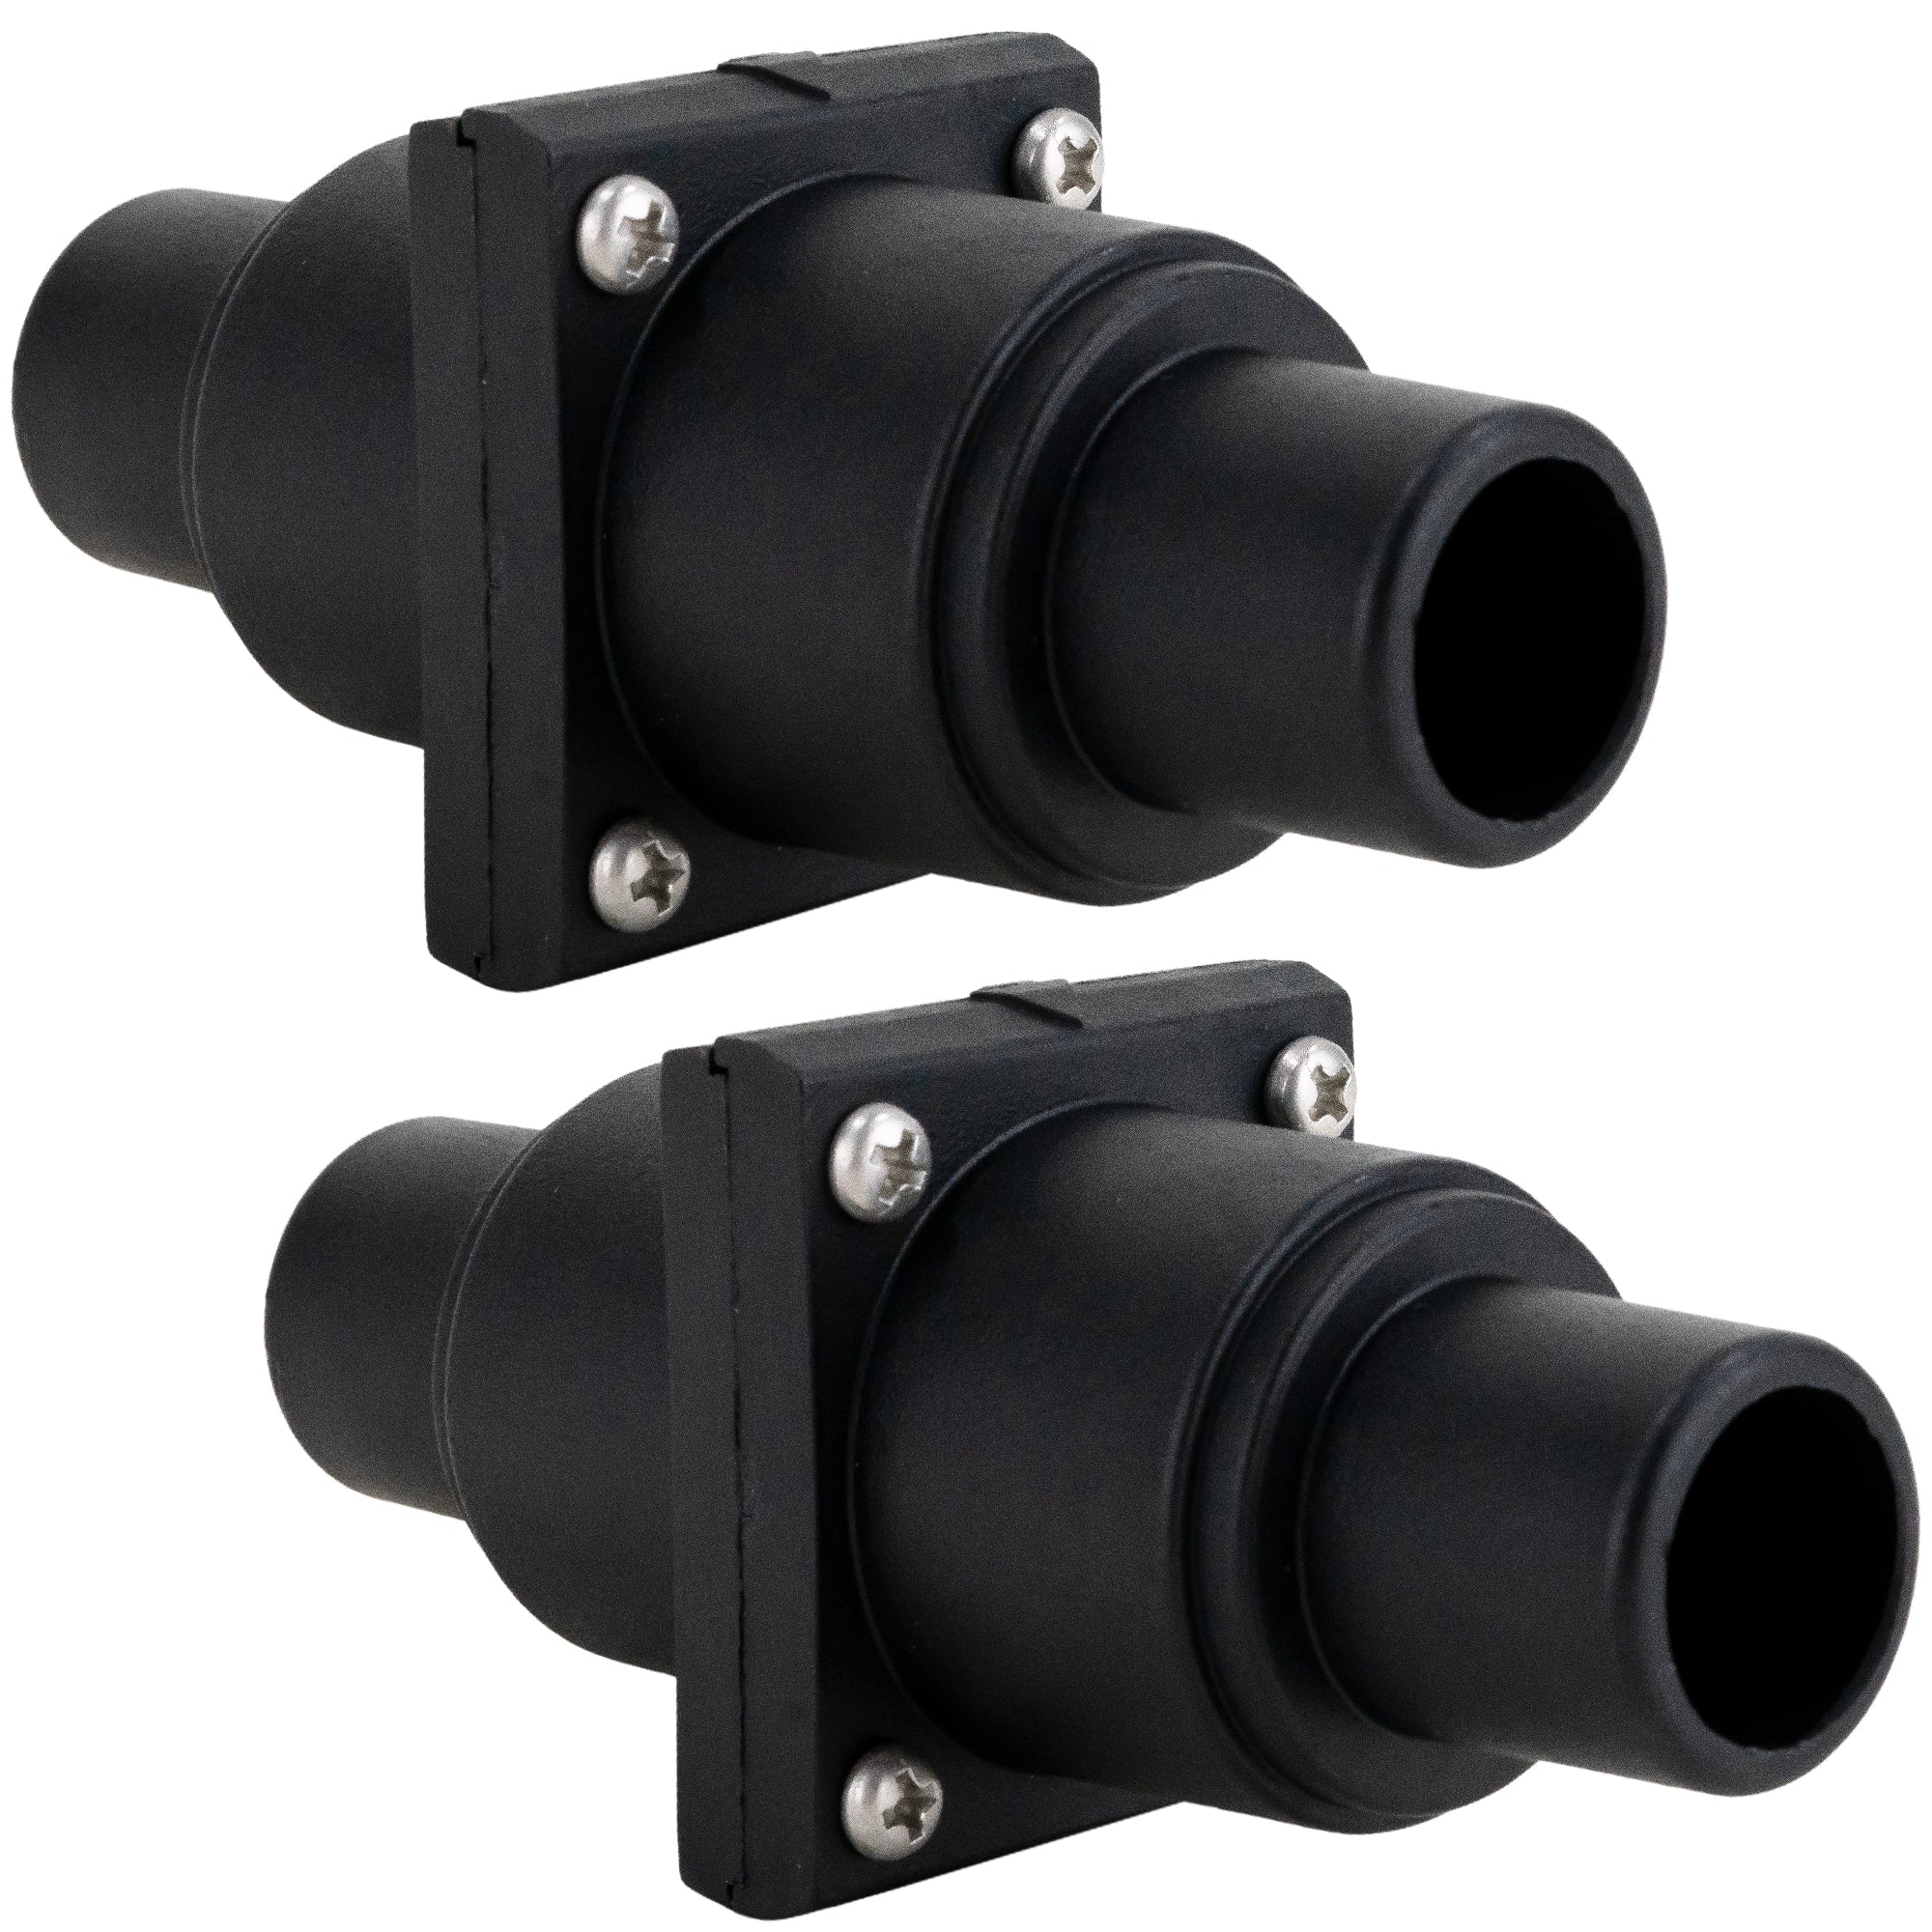 1-1 1/2" Check Valve, In-Line One-Way Stepped Connection, 2-Pack - FO4142-M2